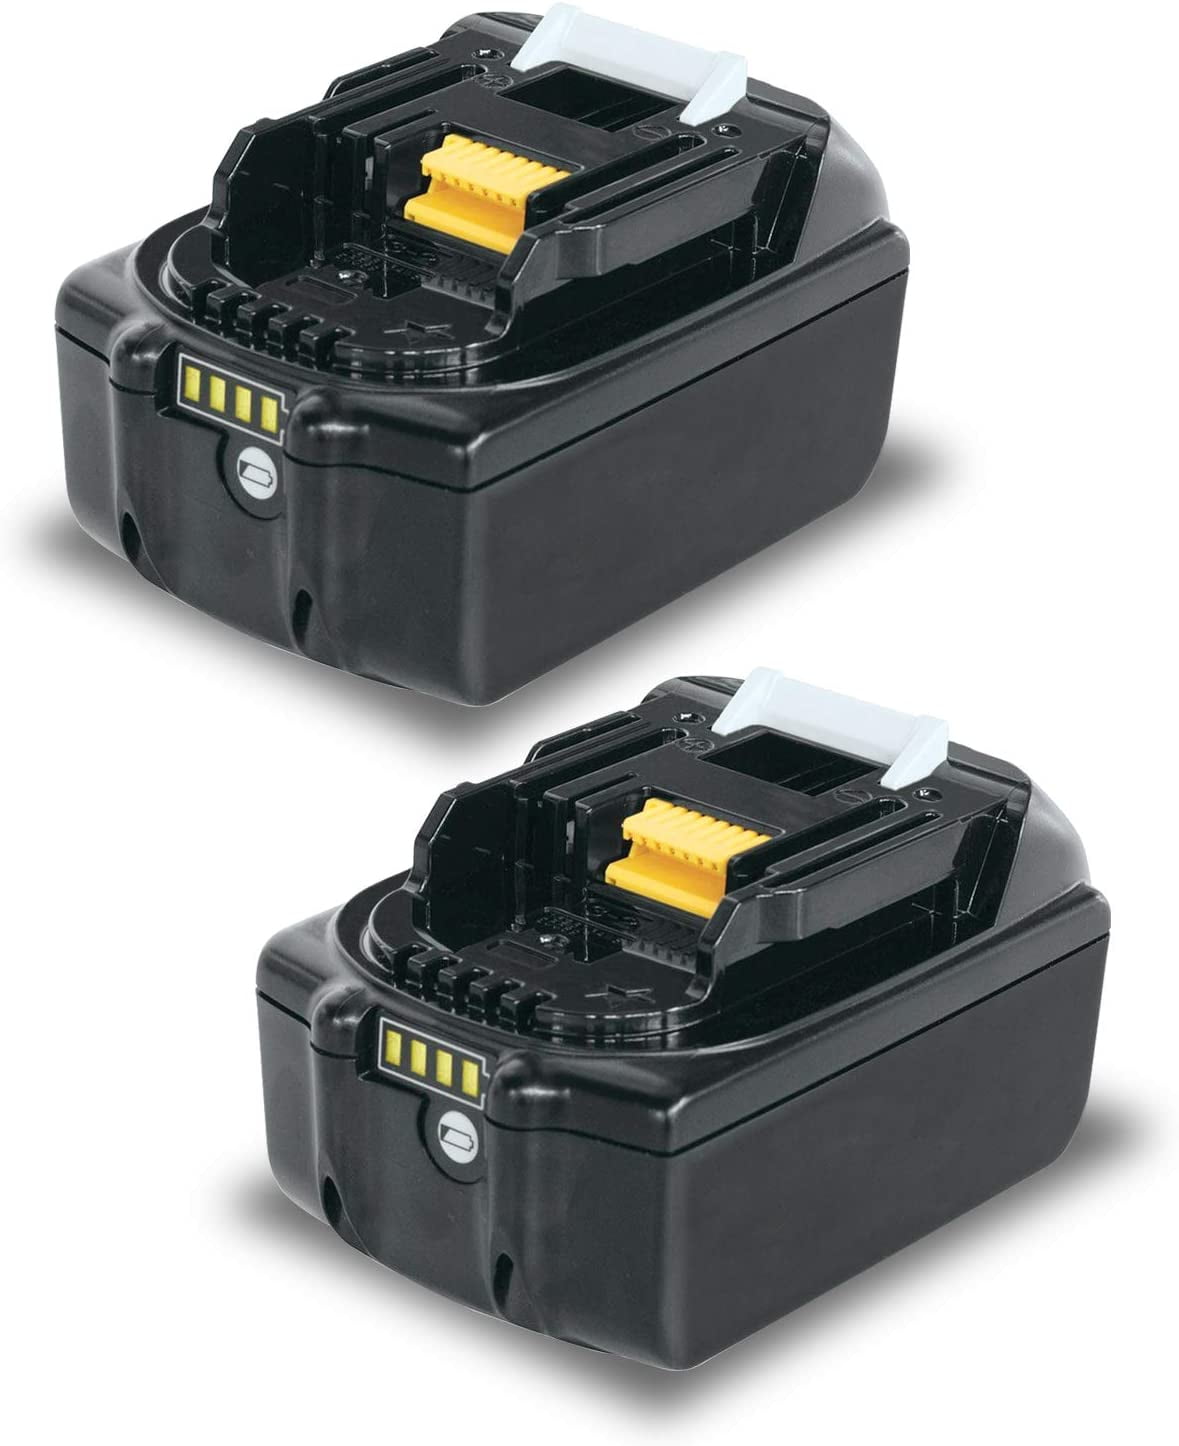 Lunch Geleidbaarheid Rijden GUVSOETS2Pack Upgrade 18V 5.0Ah Li-ion Battery Replacement for Makita  Lithium-Ion Battery Compatible with Makita BL1840 BL1850 LXT-400 BL1860  BL1815 BL1830 - Walmart.com